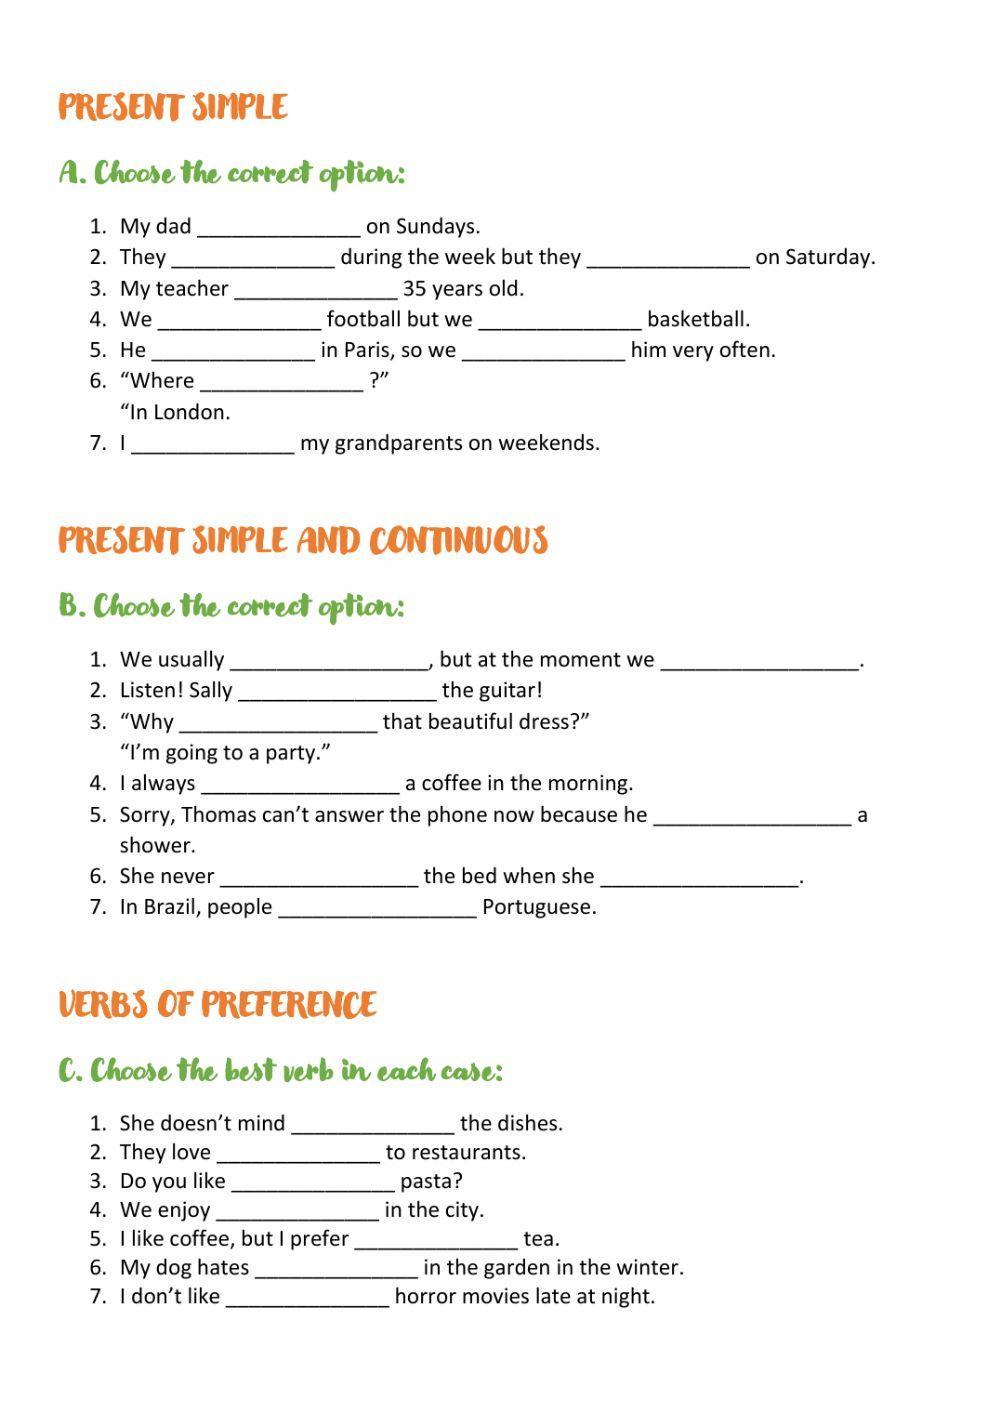 Present simple and continuous - Verbs of preference